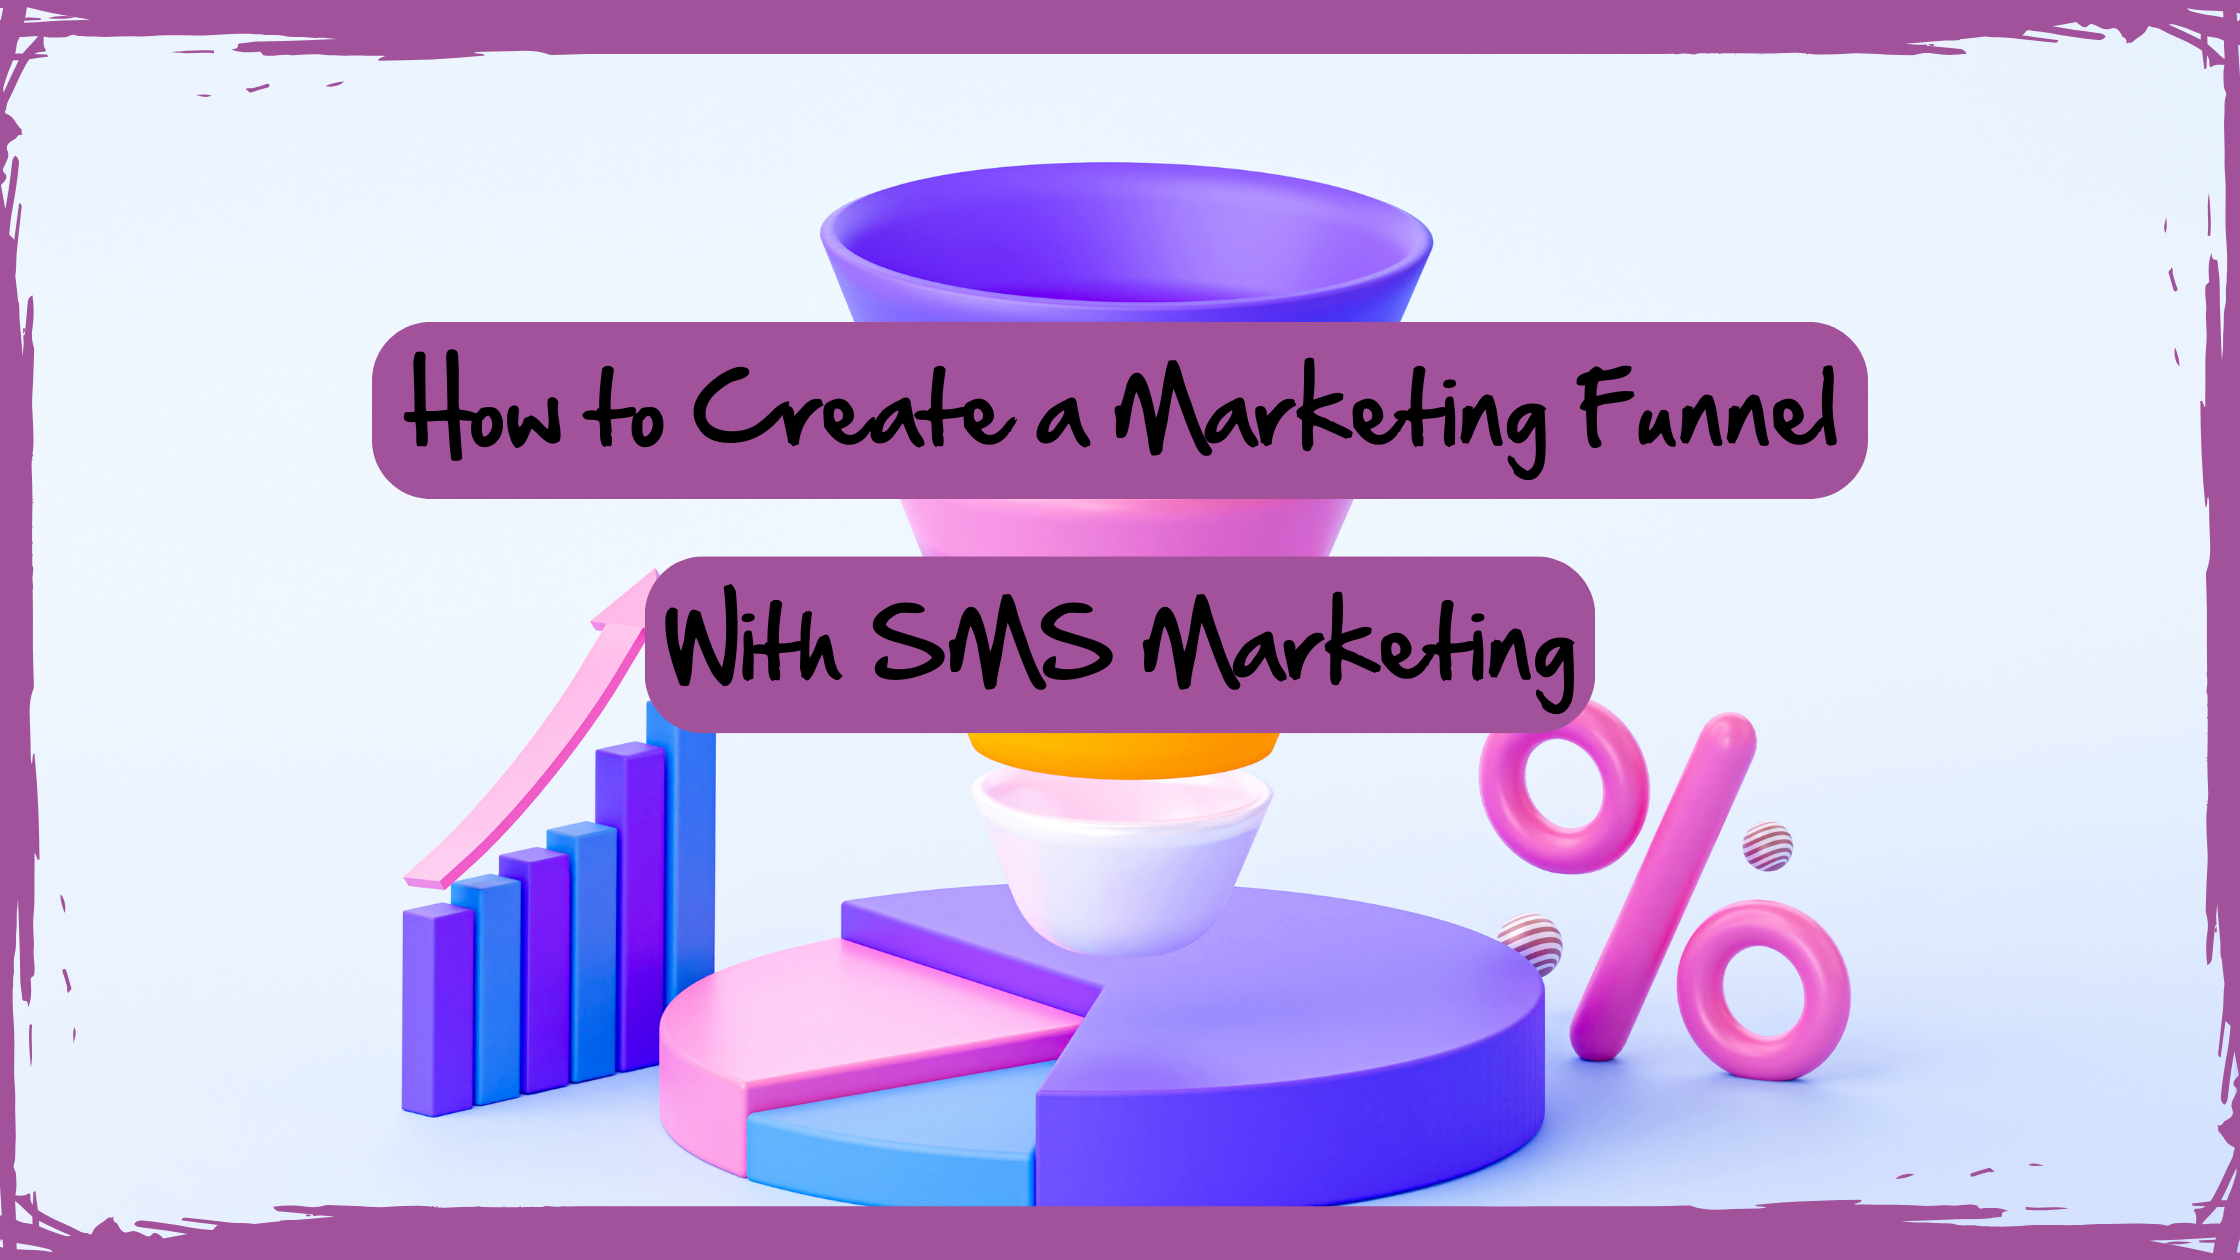 How to Create a Marketing Funnel With SMS Marketing